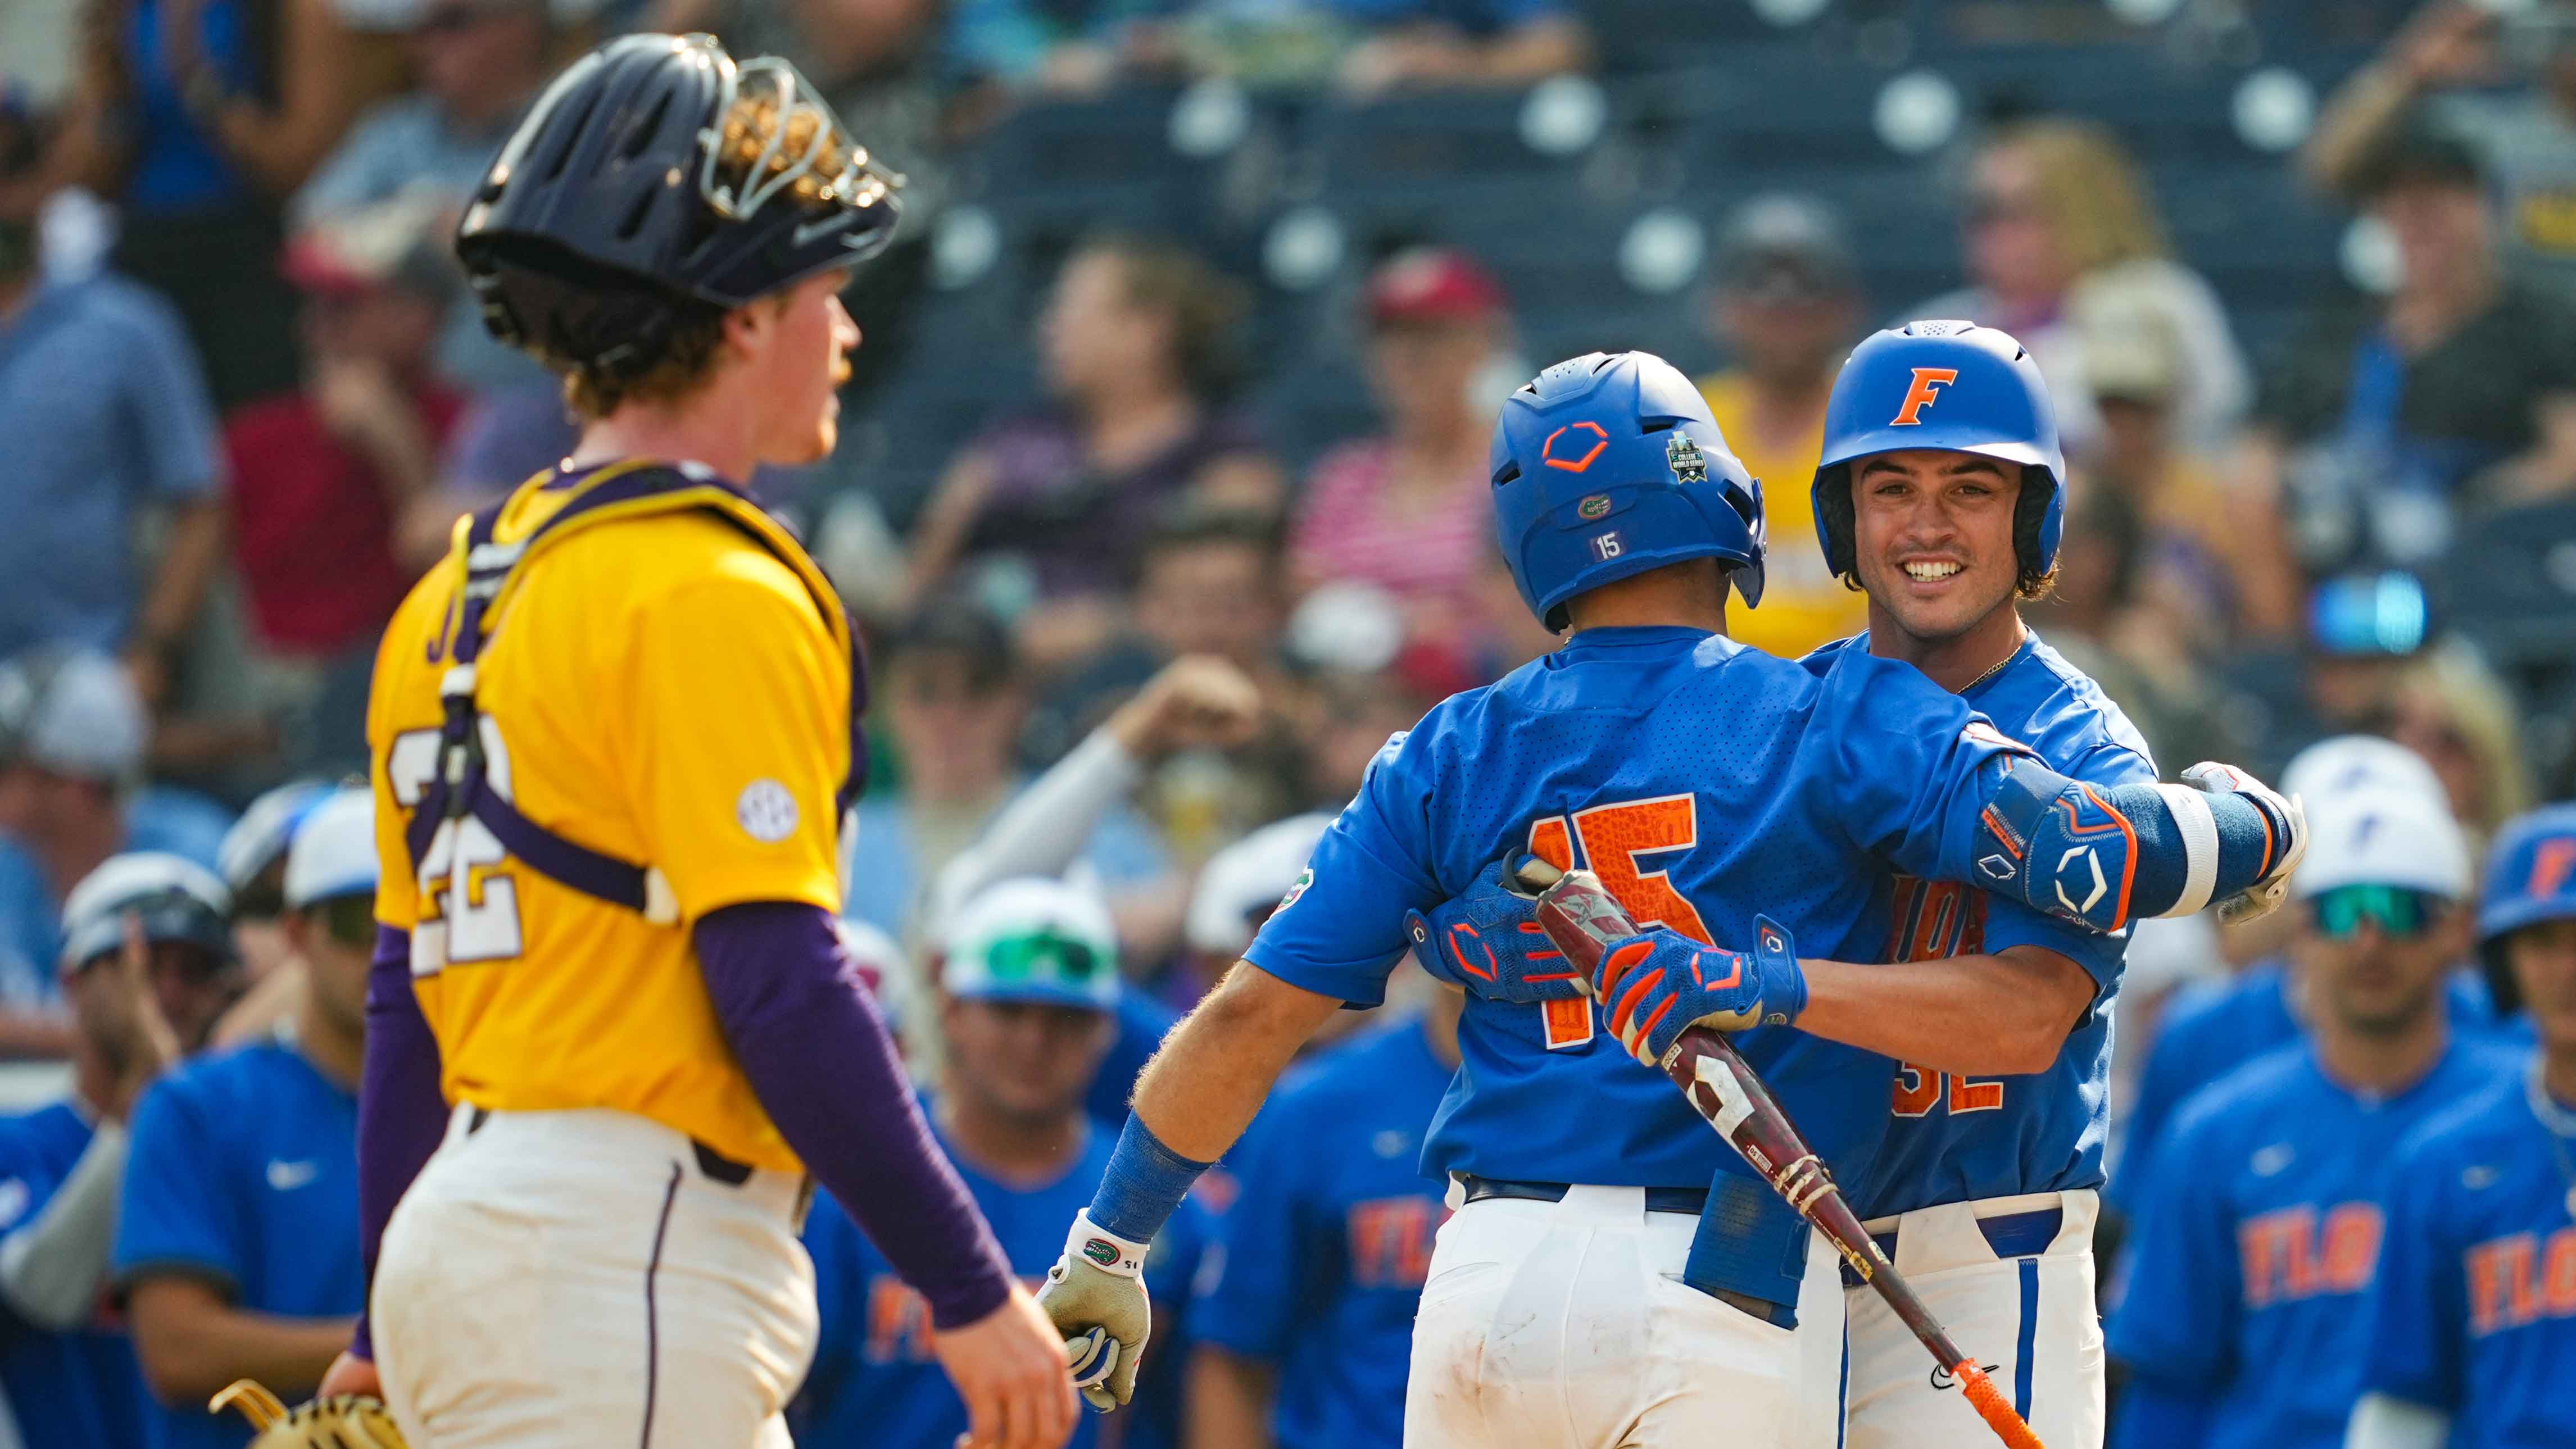 LSU vs Florida Game 3 time: LSU vs Florida Game 3: Live streaming